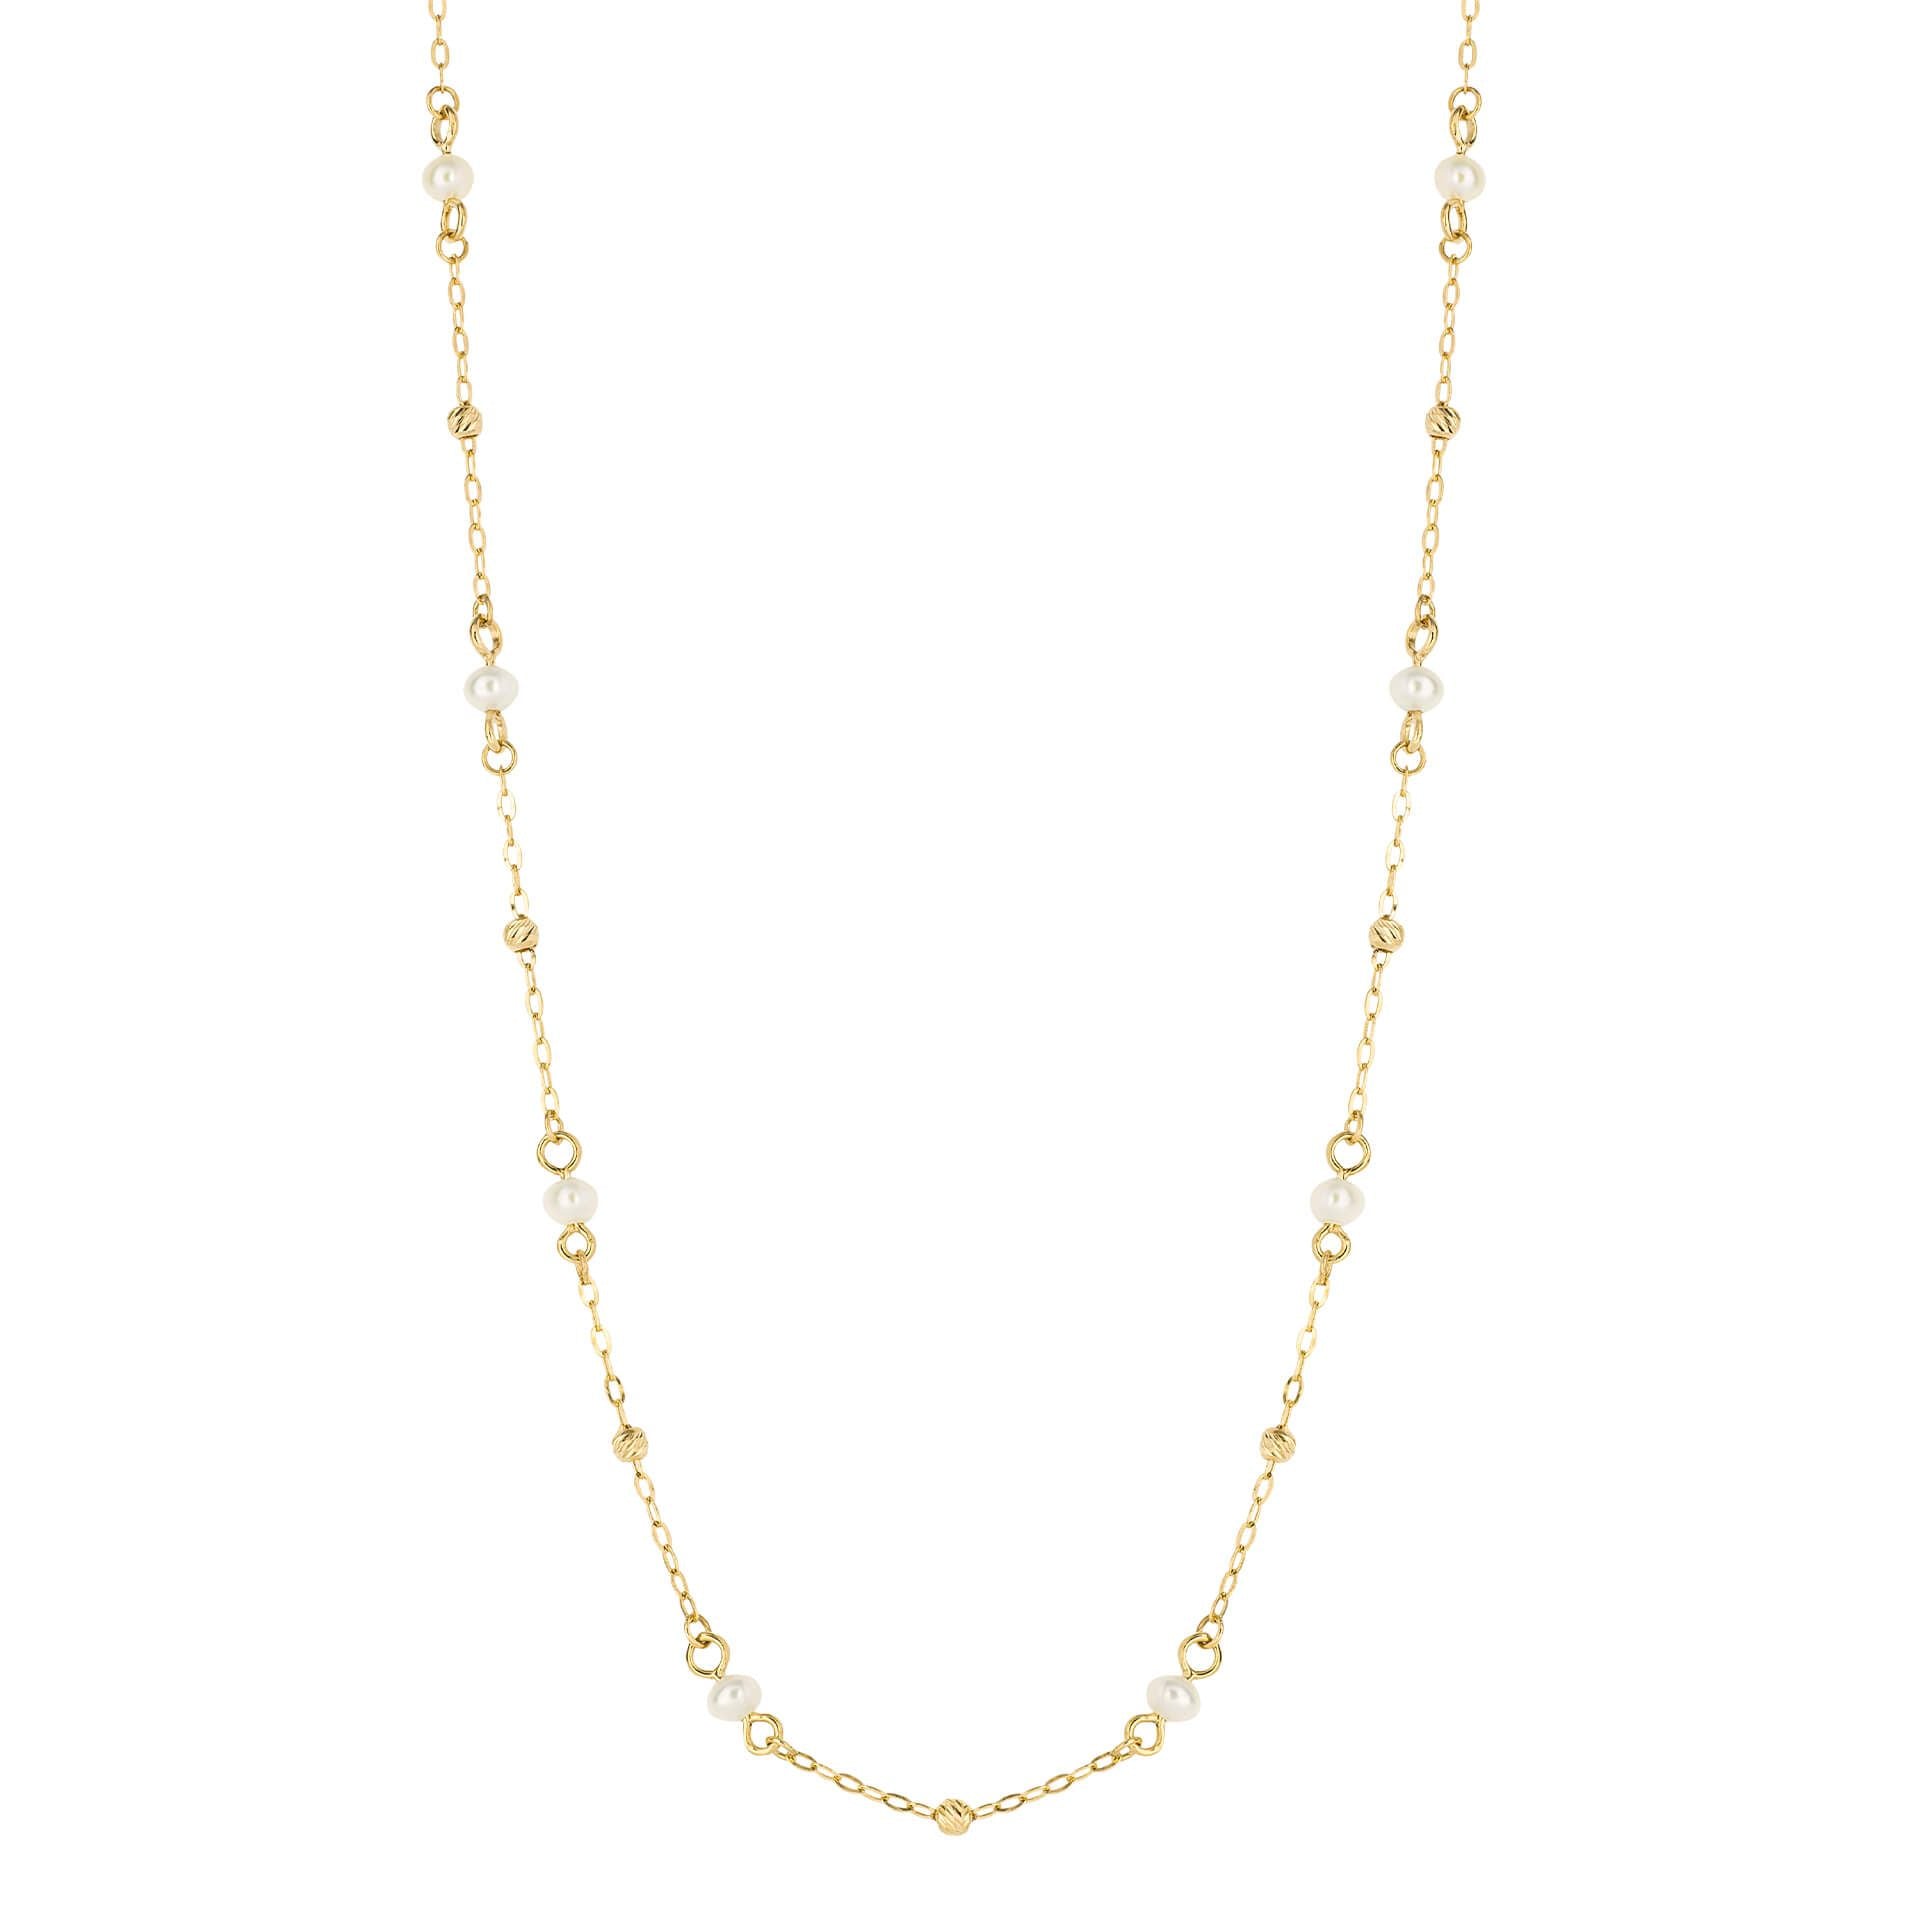 Freshwater Pearl & 9ct Gold Necklace